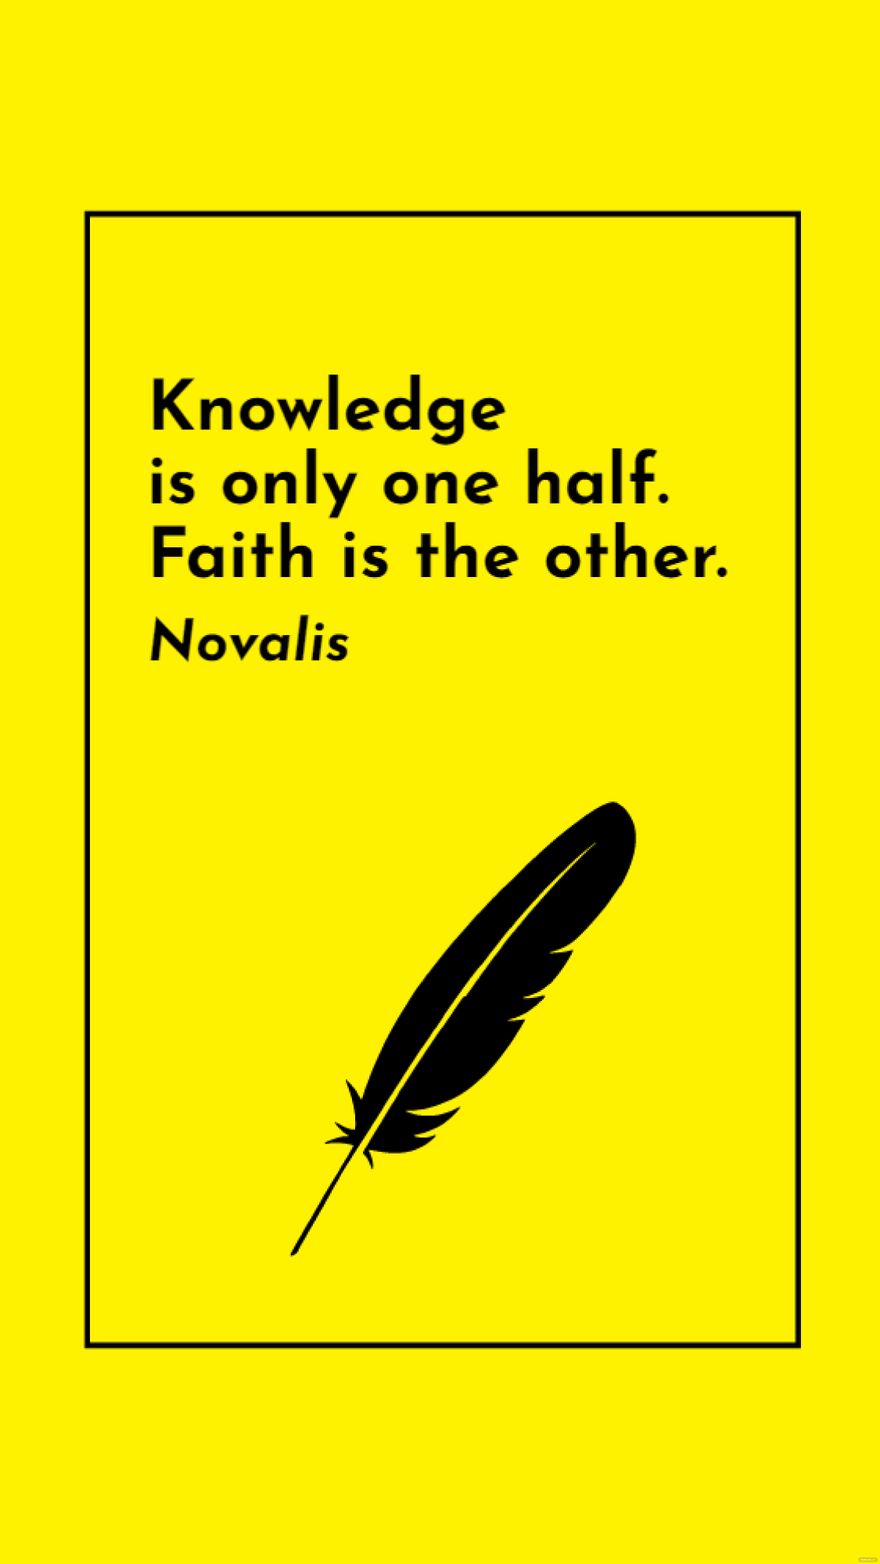 Novalis - Knowledge is only one half. Faith is the other.